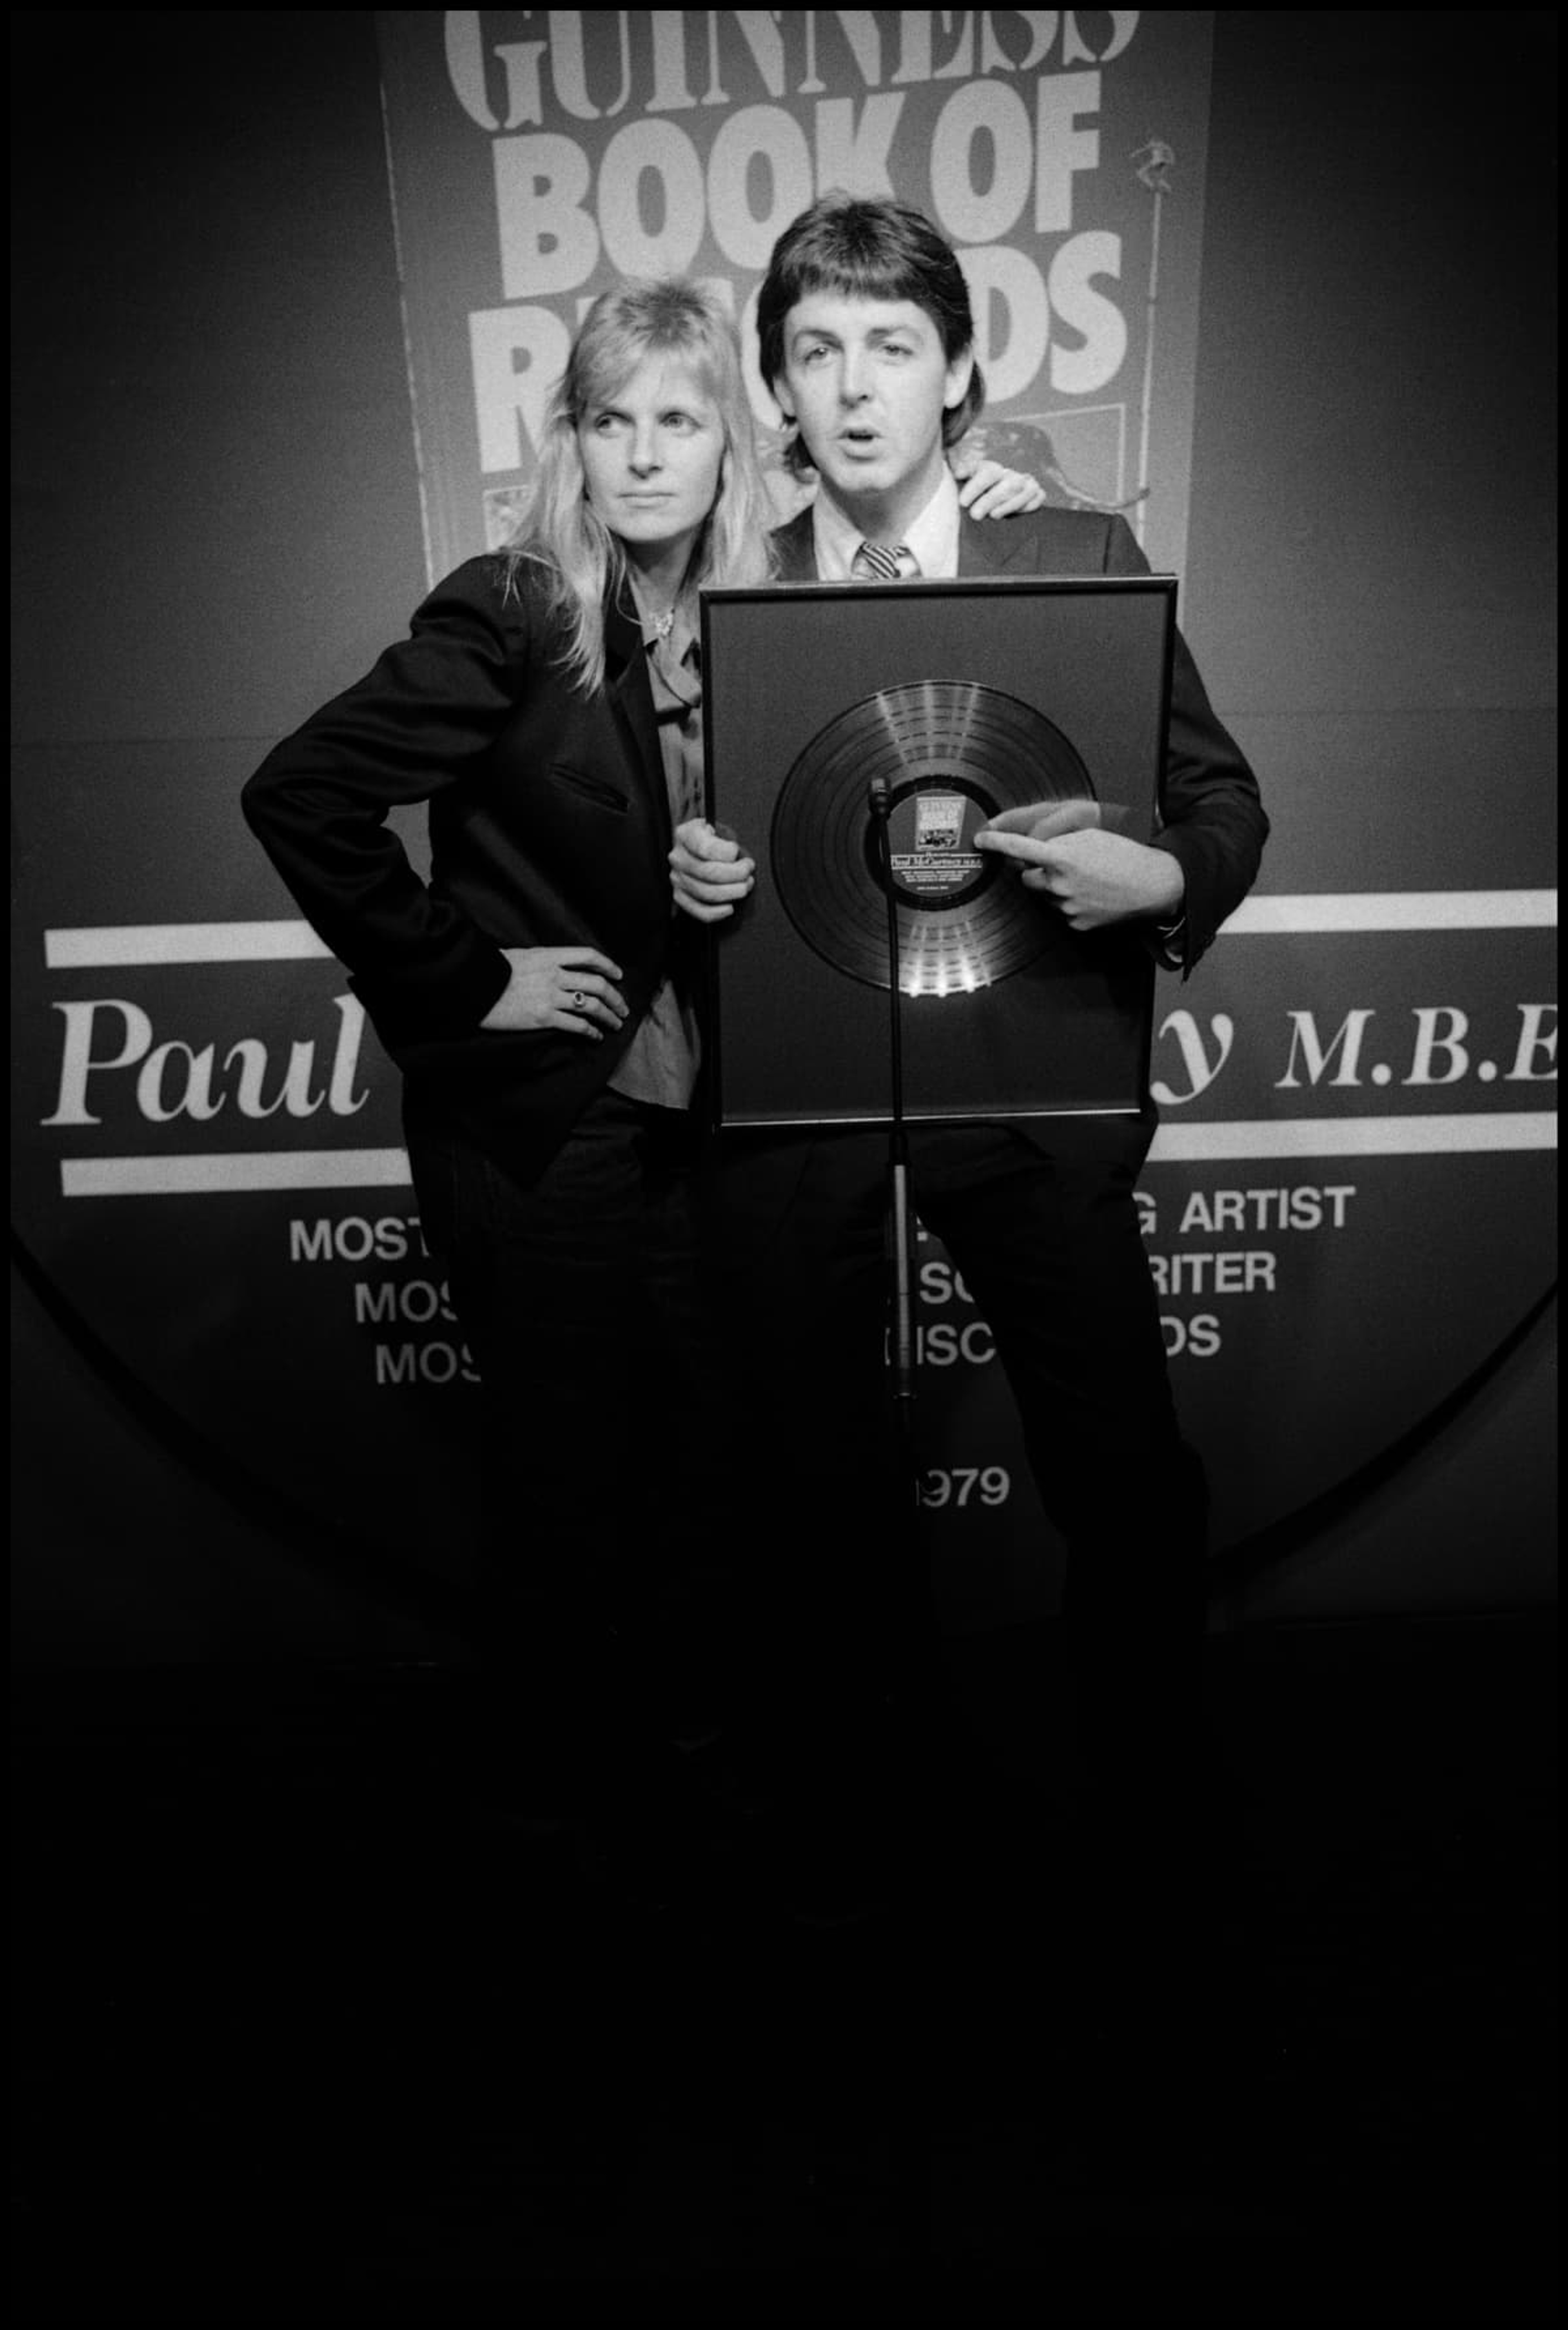 Paul and Linda pose with a Guinness World Record